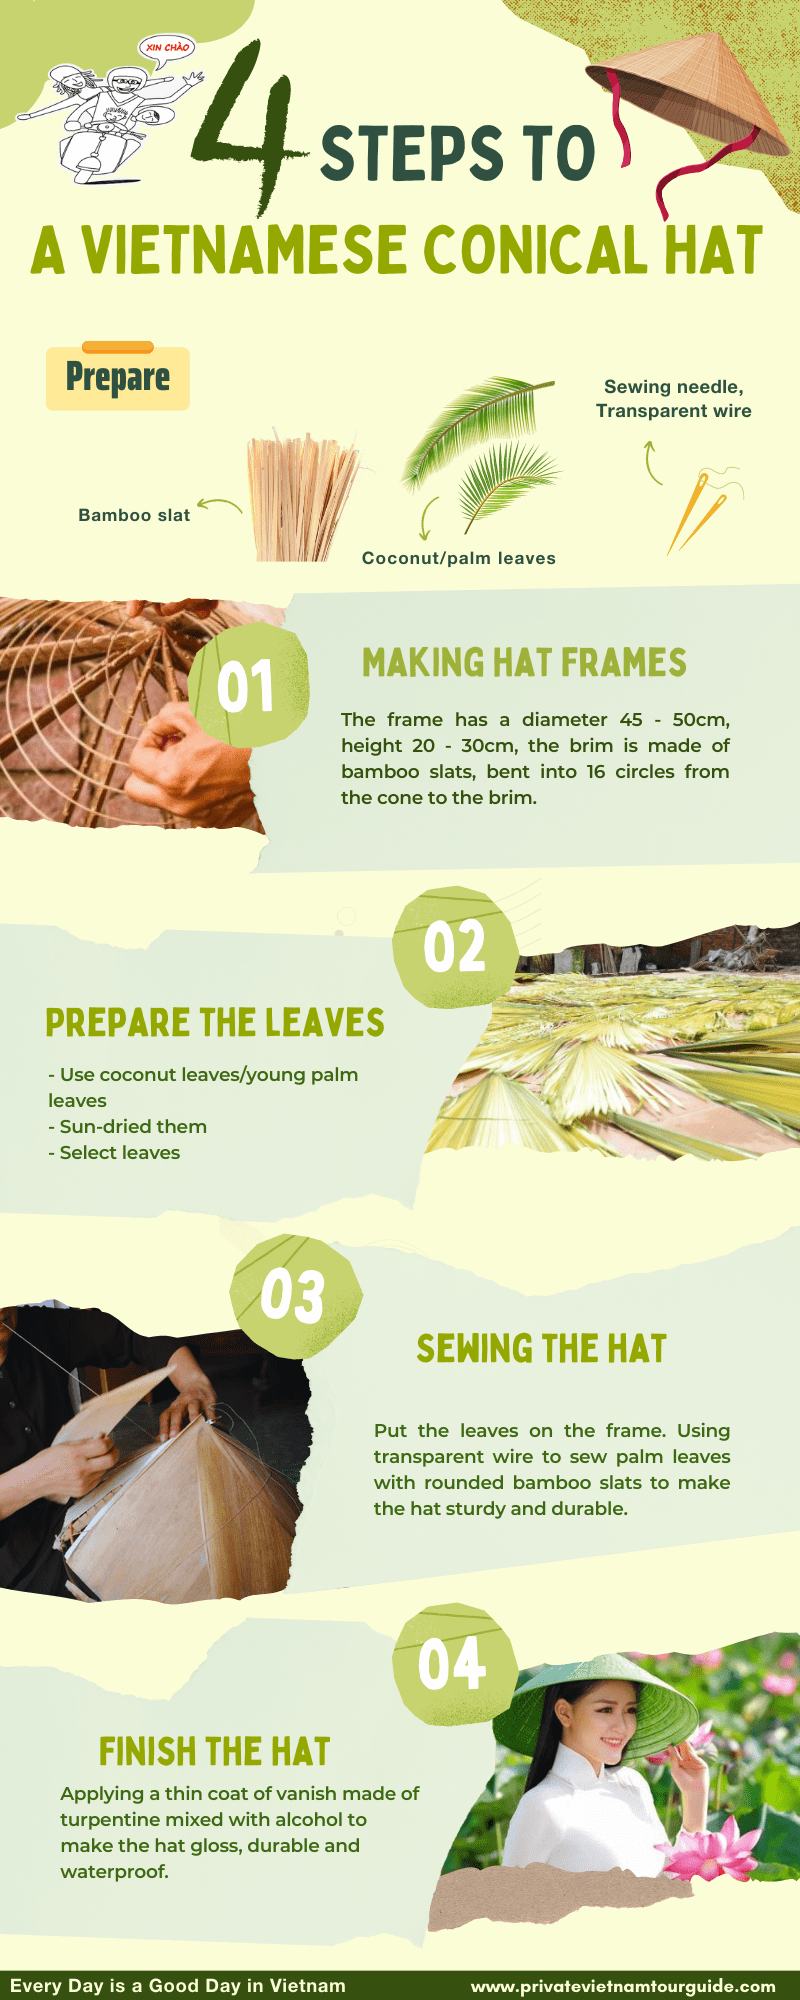 How To Make A Vietnamese Conical Hat